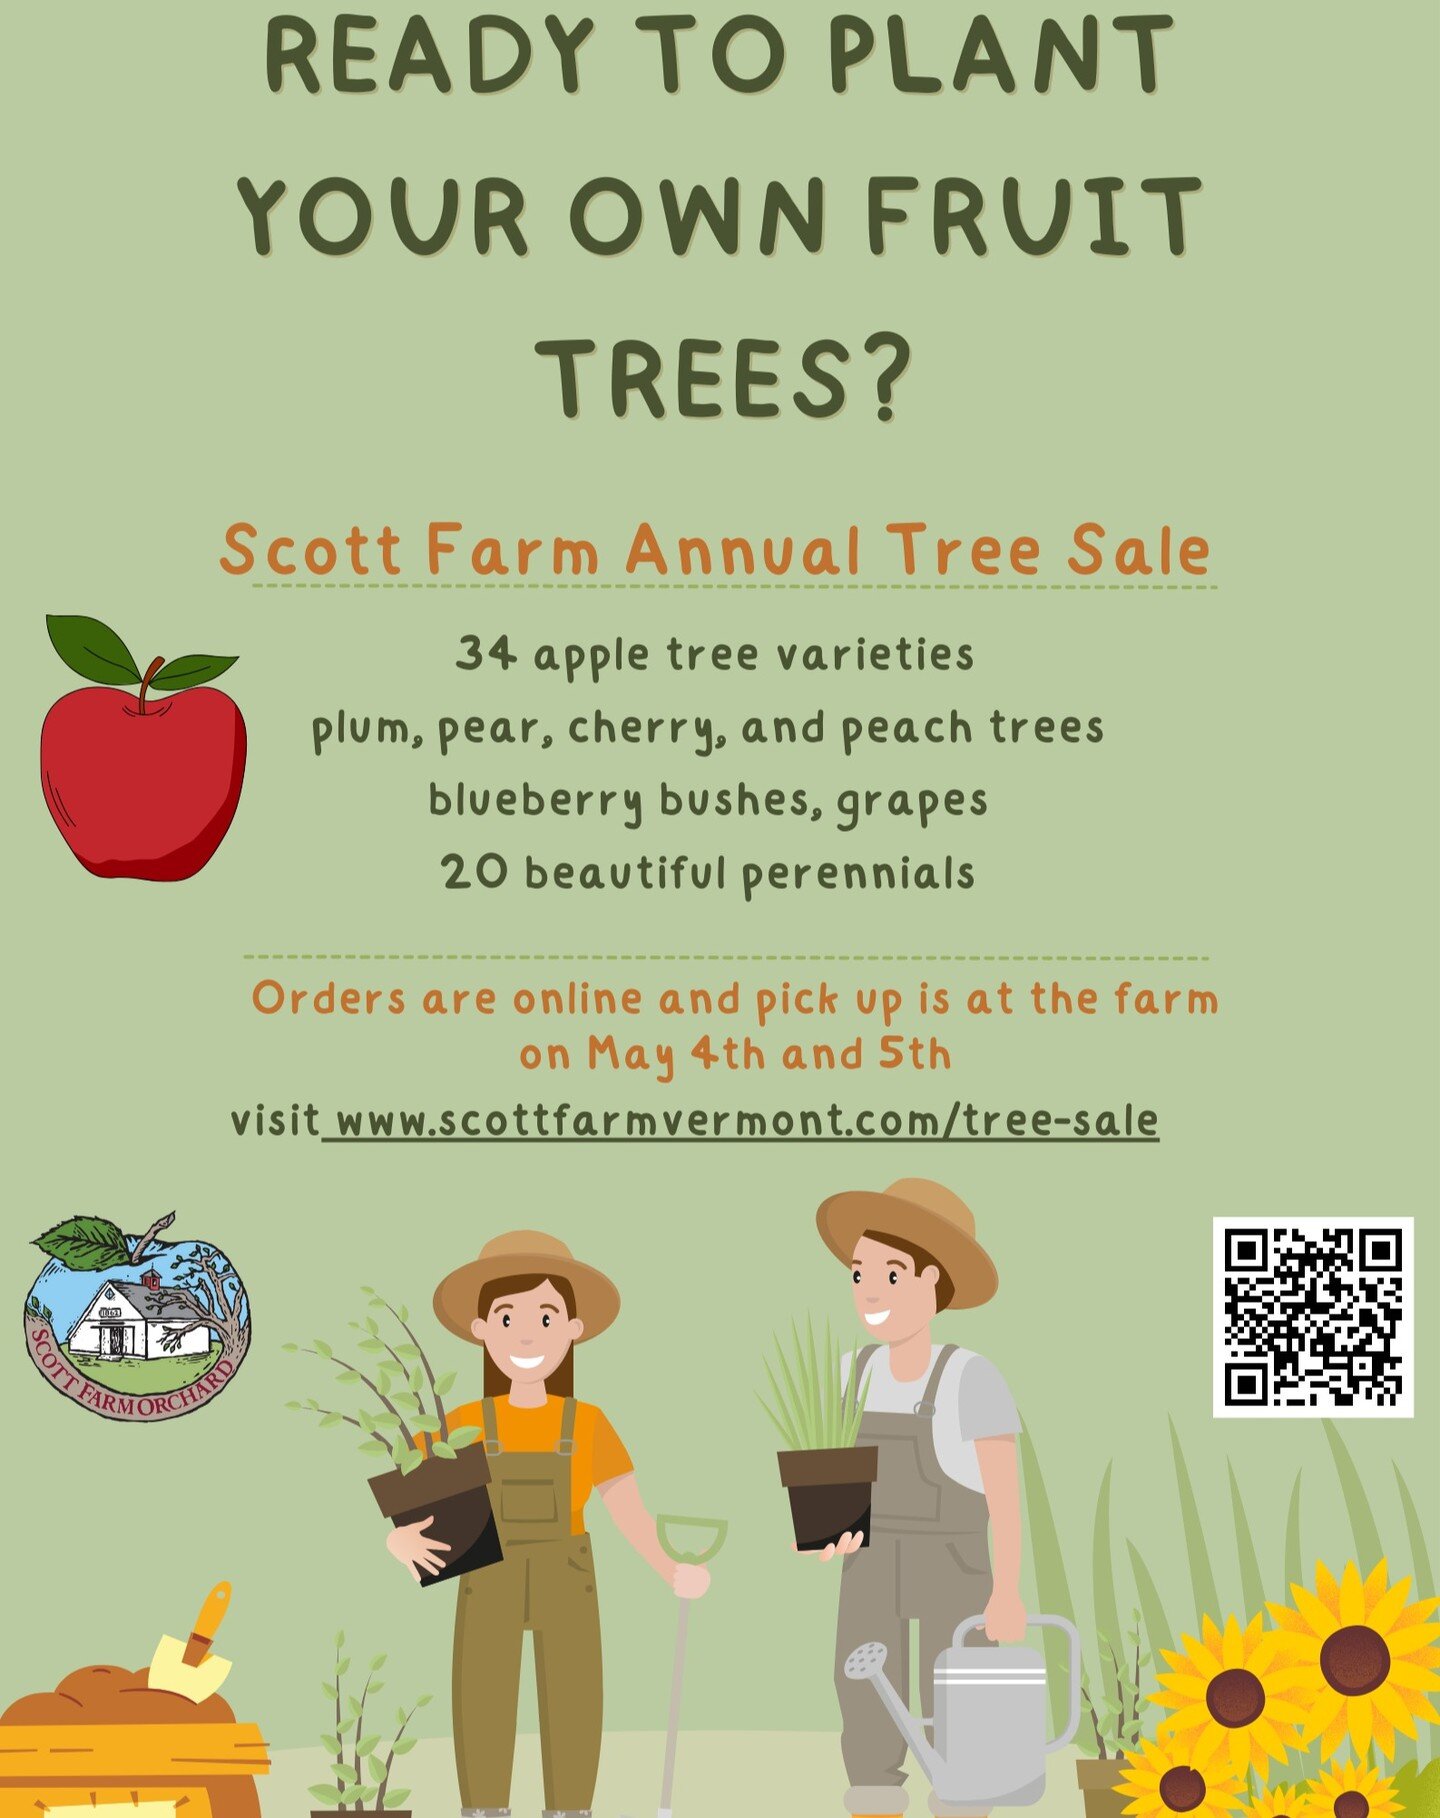 Our Tree Sale is live!

All orders are placed online and will be picked up at the farm on May 4th and 4th. We do not ship trees.

We have a great collection of bare root apple trees stone fruit, blueberry bushes, gapes and all kinds of perennials.

L